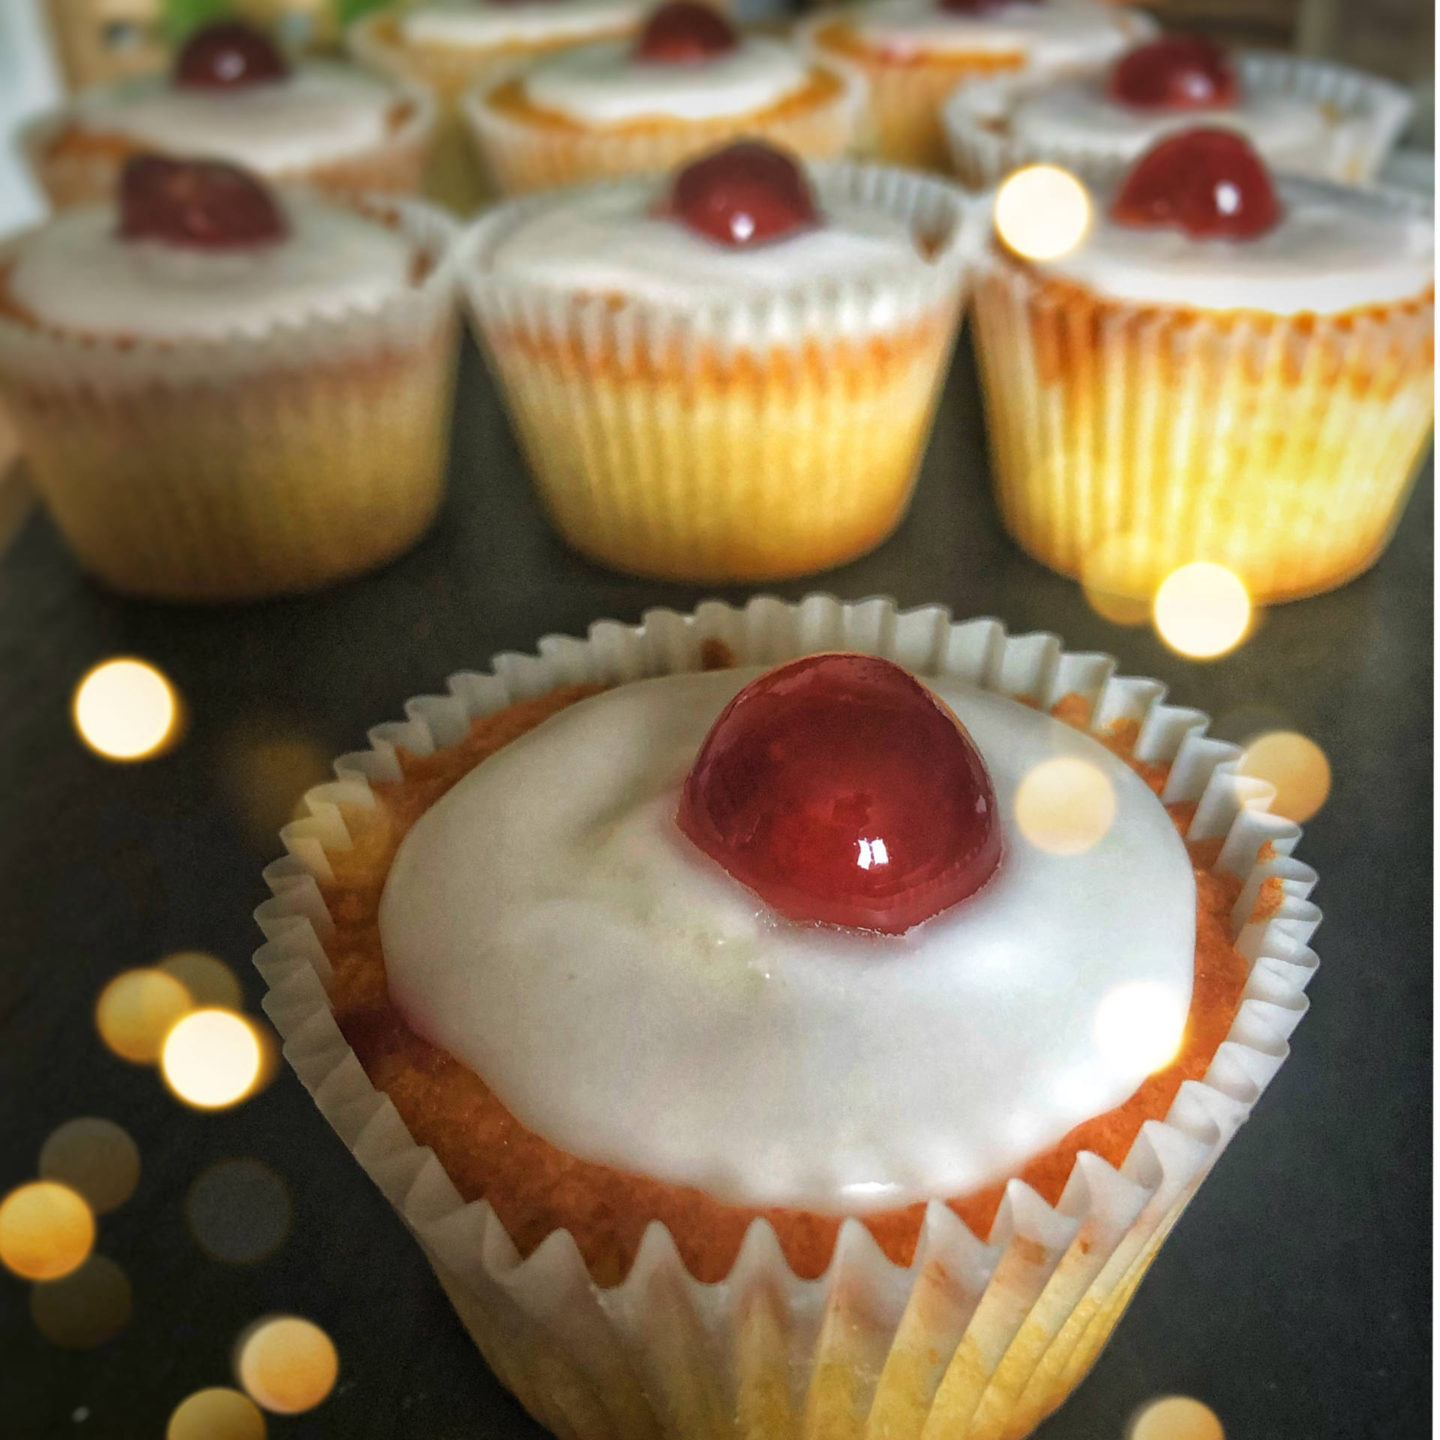 Delicious and Simple Cherry Bakewell Cupcakes Recipe